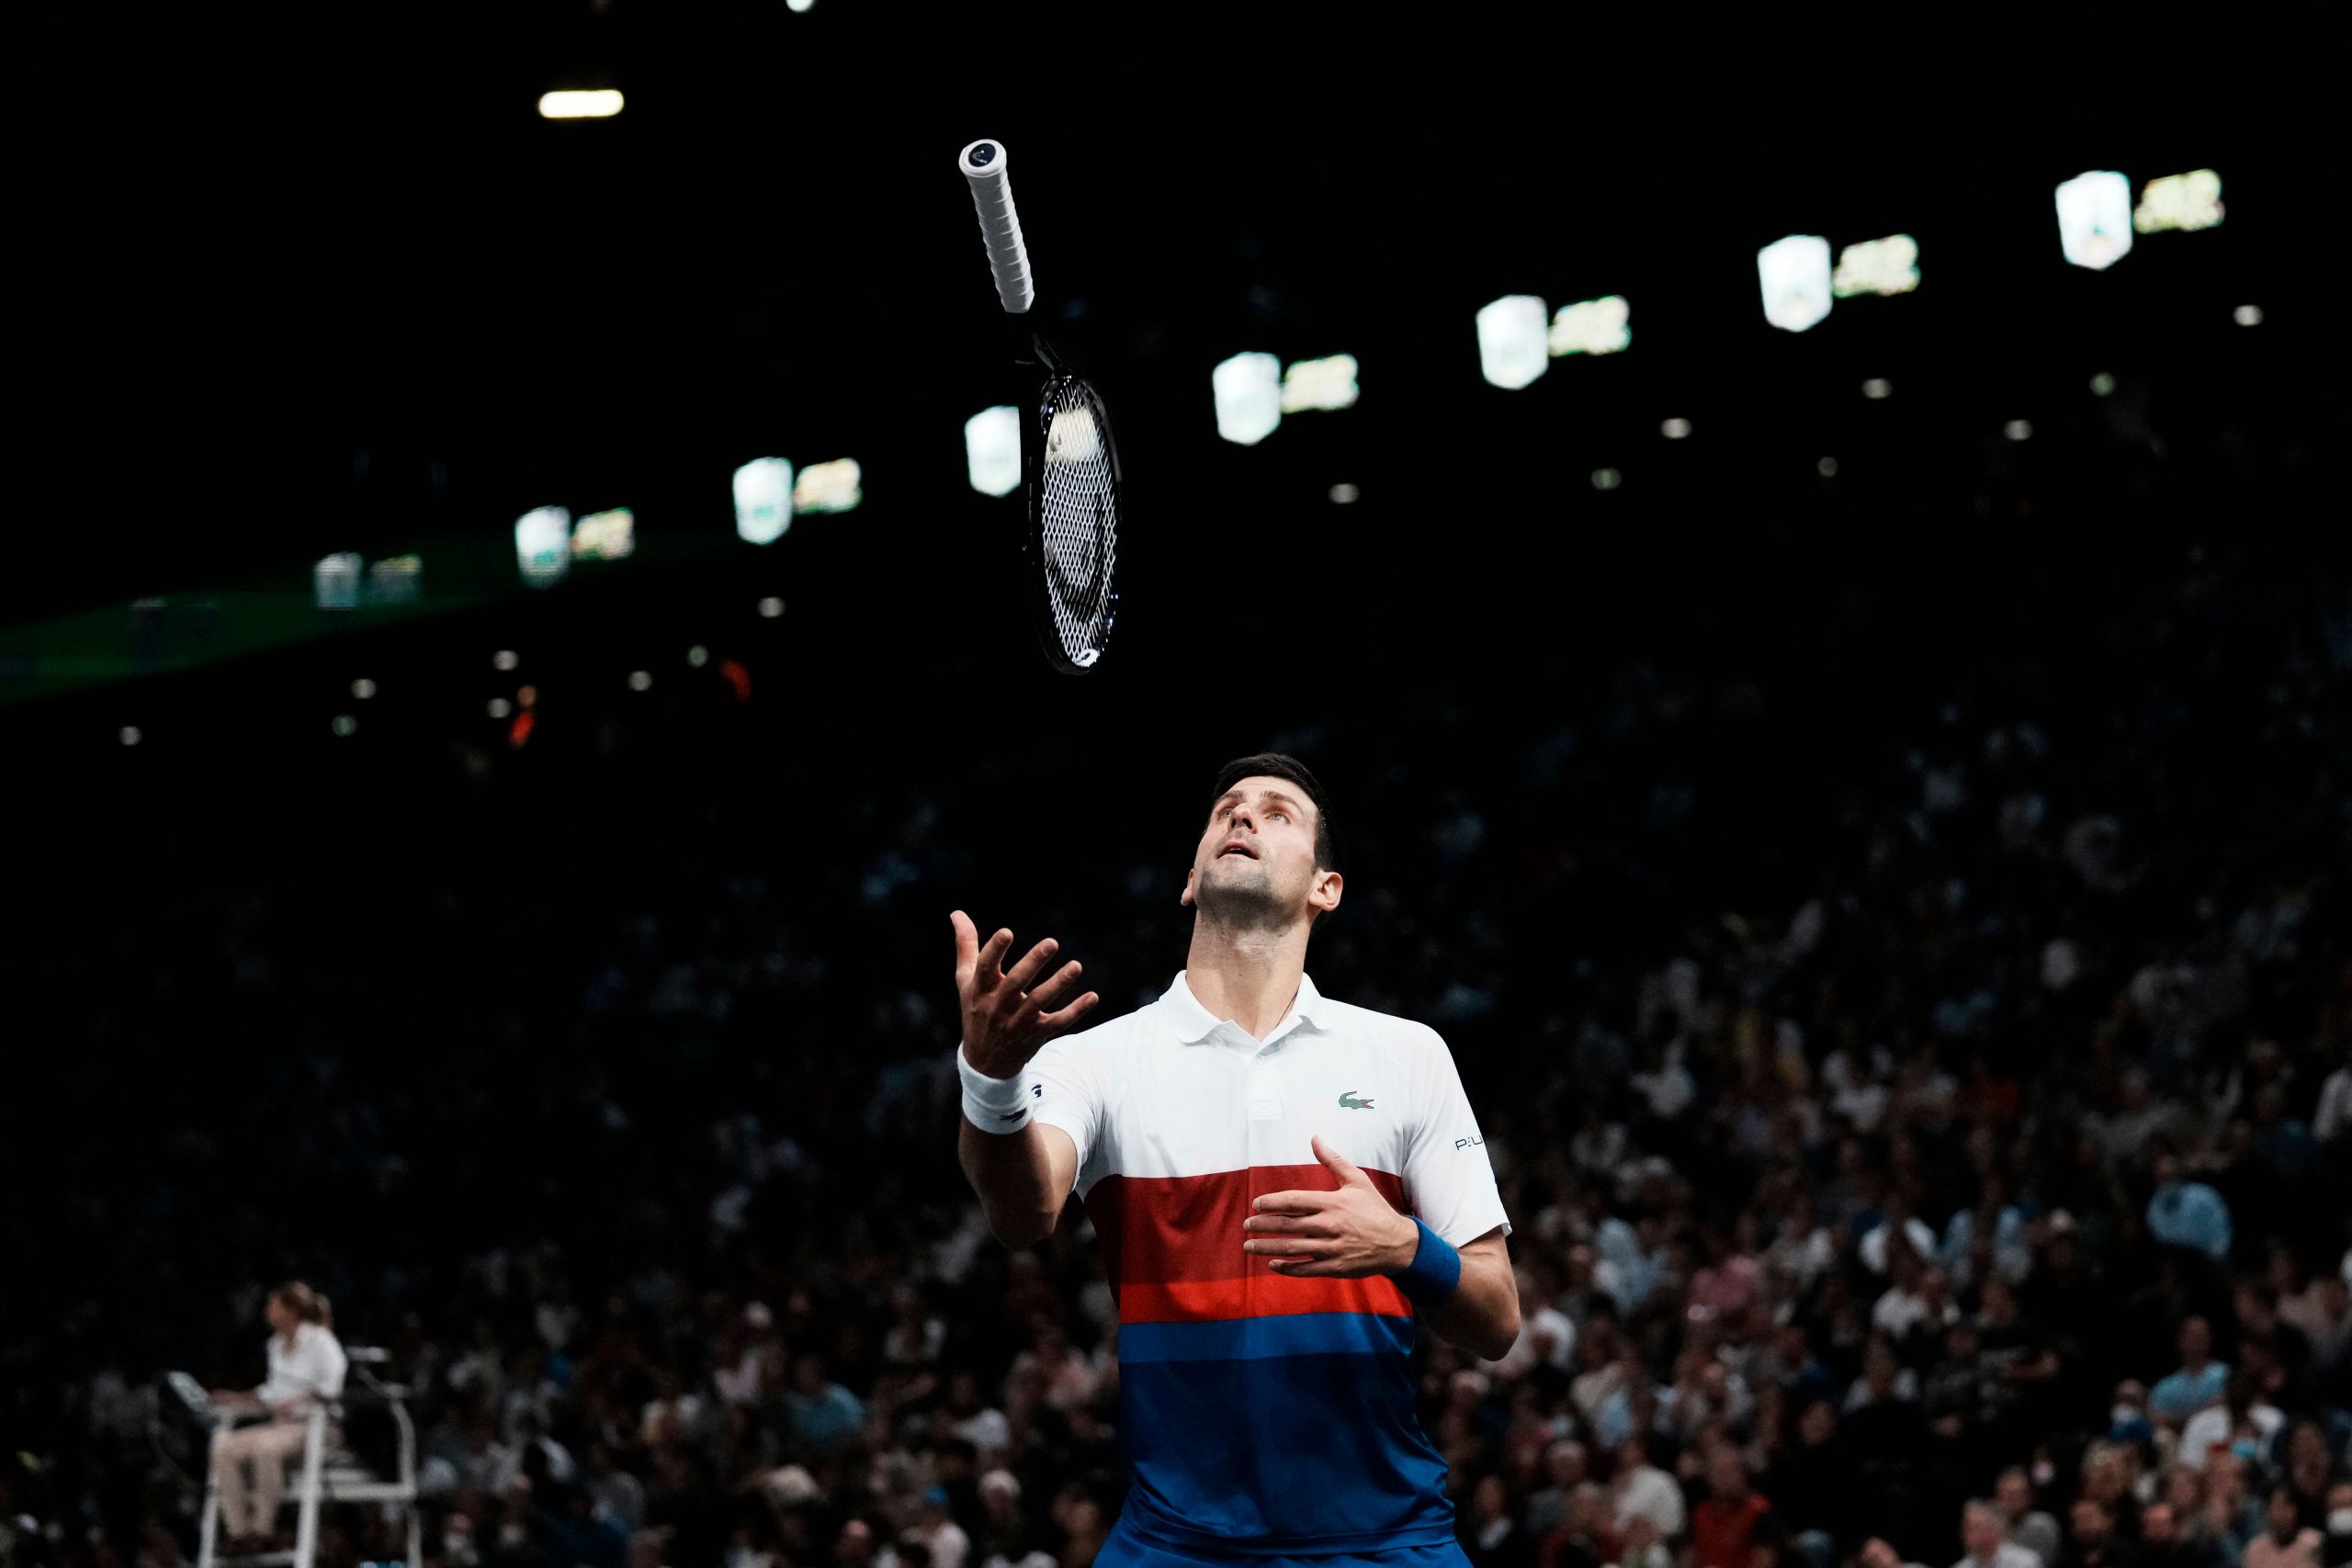 Medvedev believes Djokovic will get due respect only post retirement